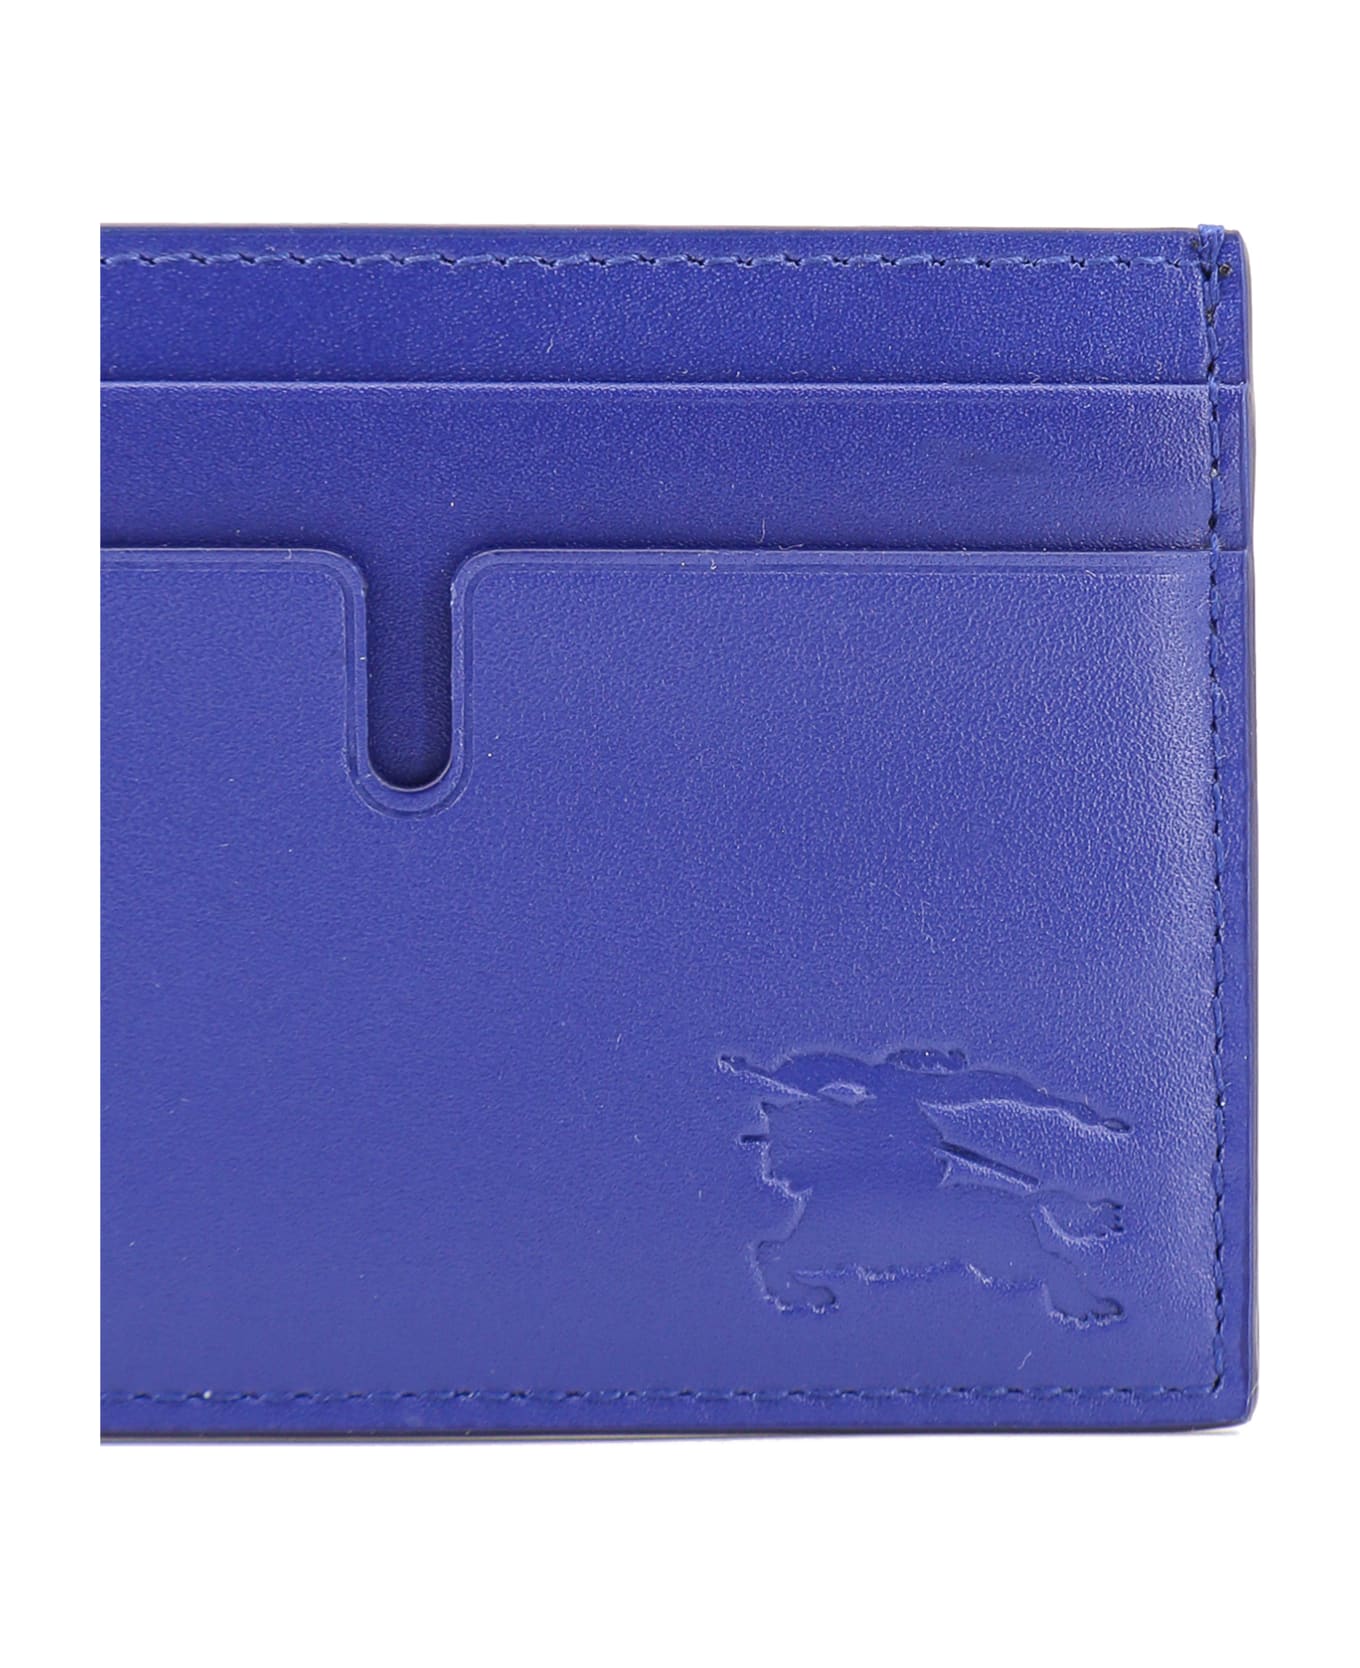 Burberry Horseferry 5 Slots Card Case - Blue